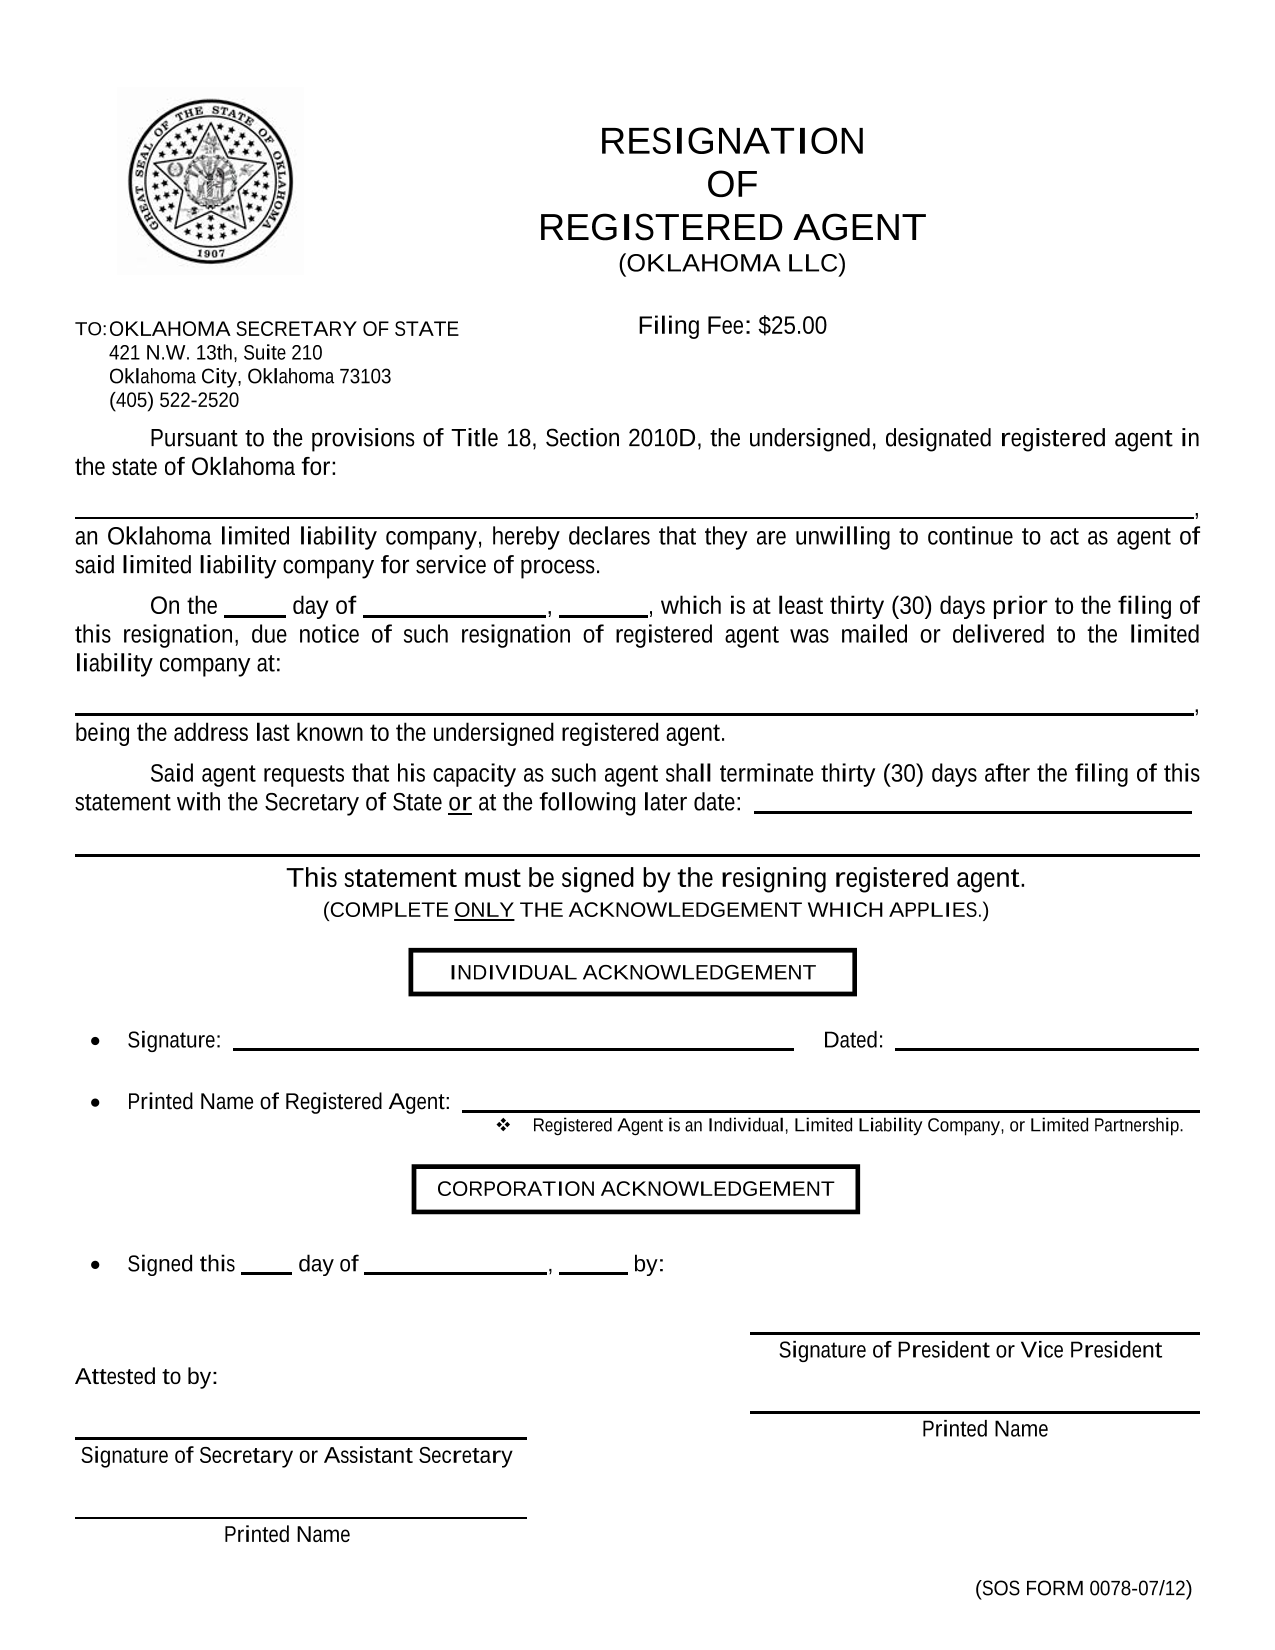 oklahoma-llc-resignation-of-registered-agent-coupled-with-appointment-of-successor